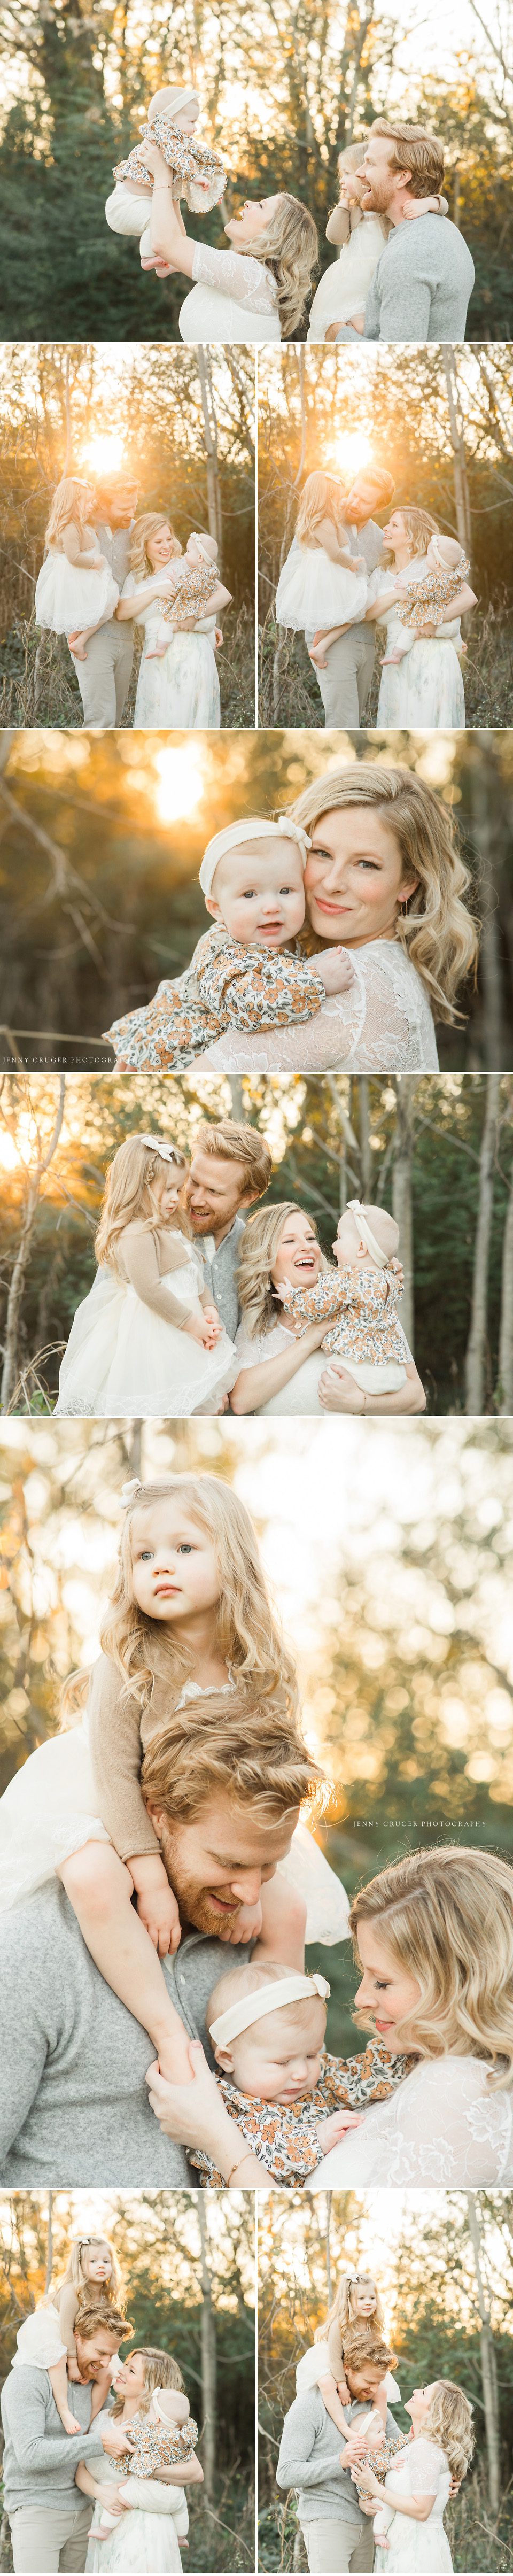 nashville fall family sessions at golden hour 